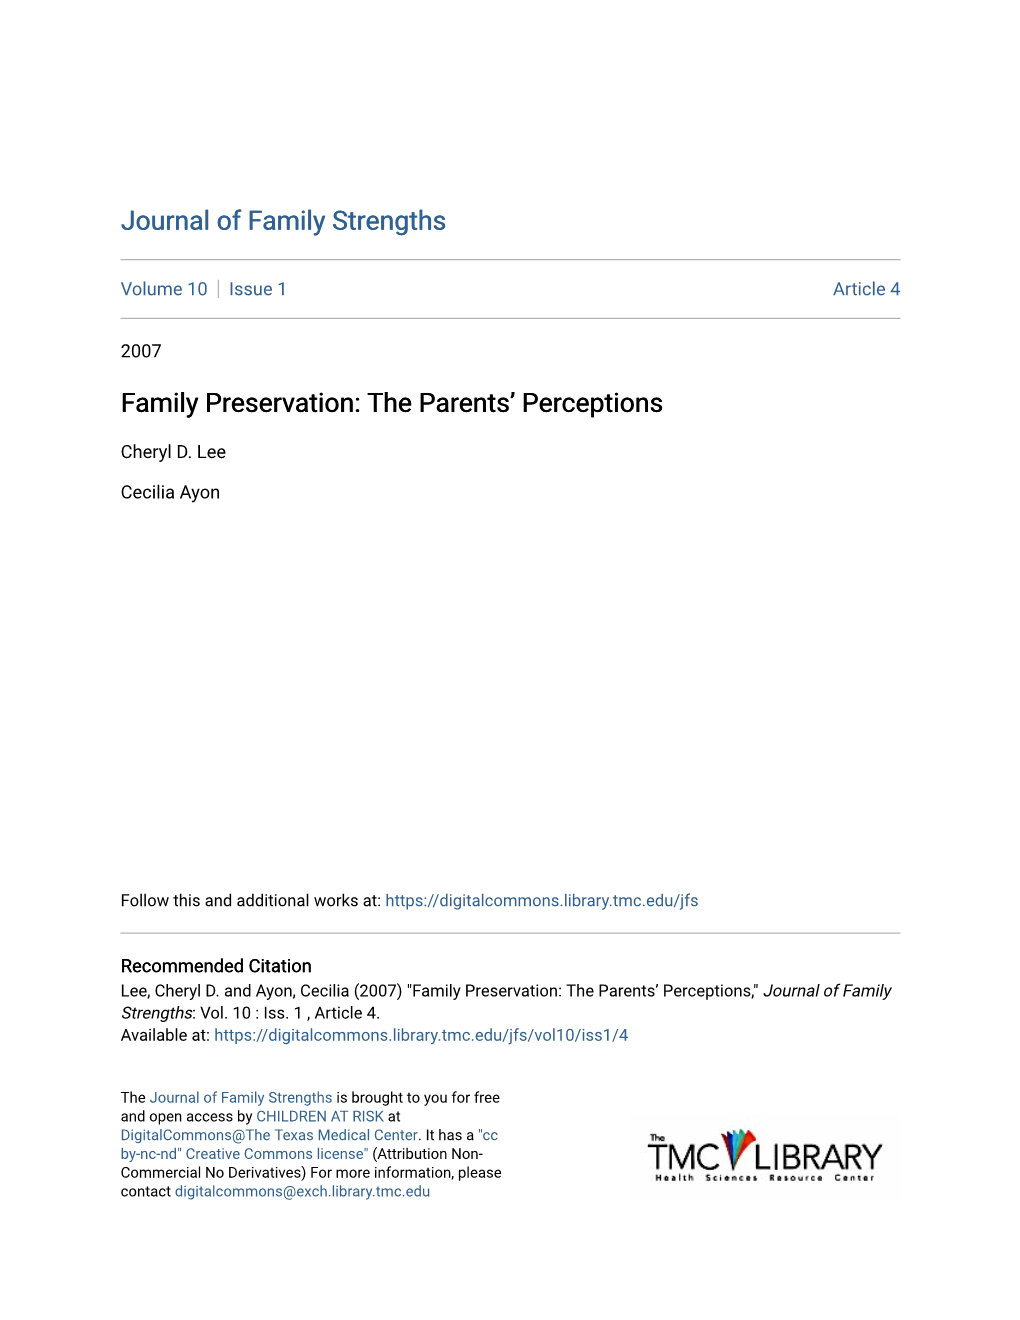 Family Preservation: the Parents’ Perceptions